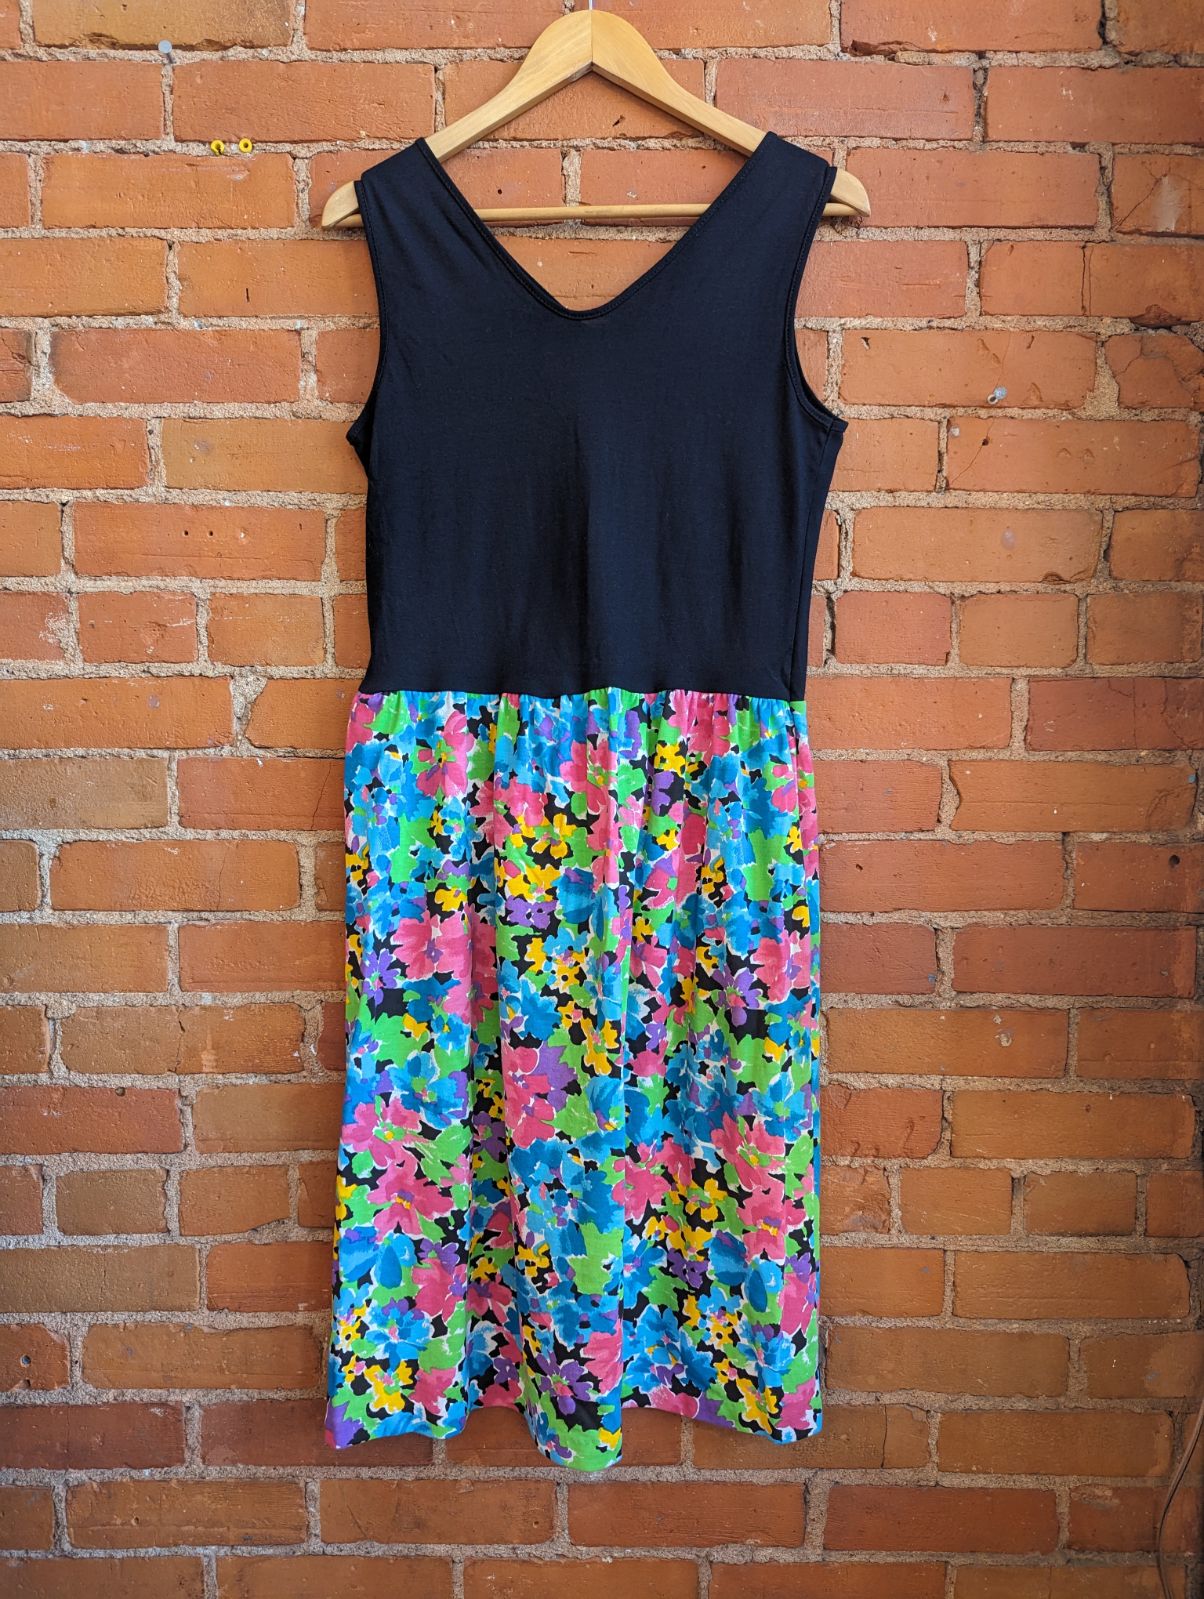 1980s Tank Dress With Black Button Front Bodice and Floral Skirt